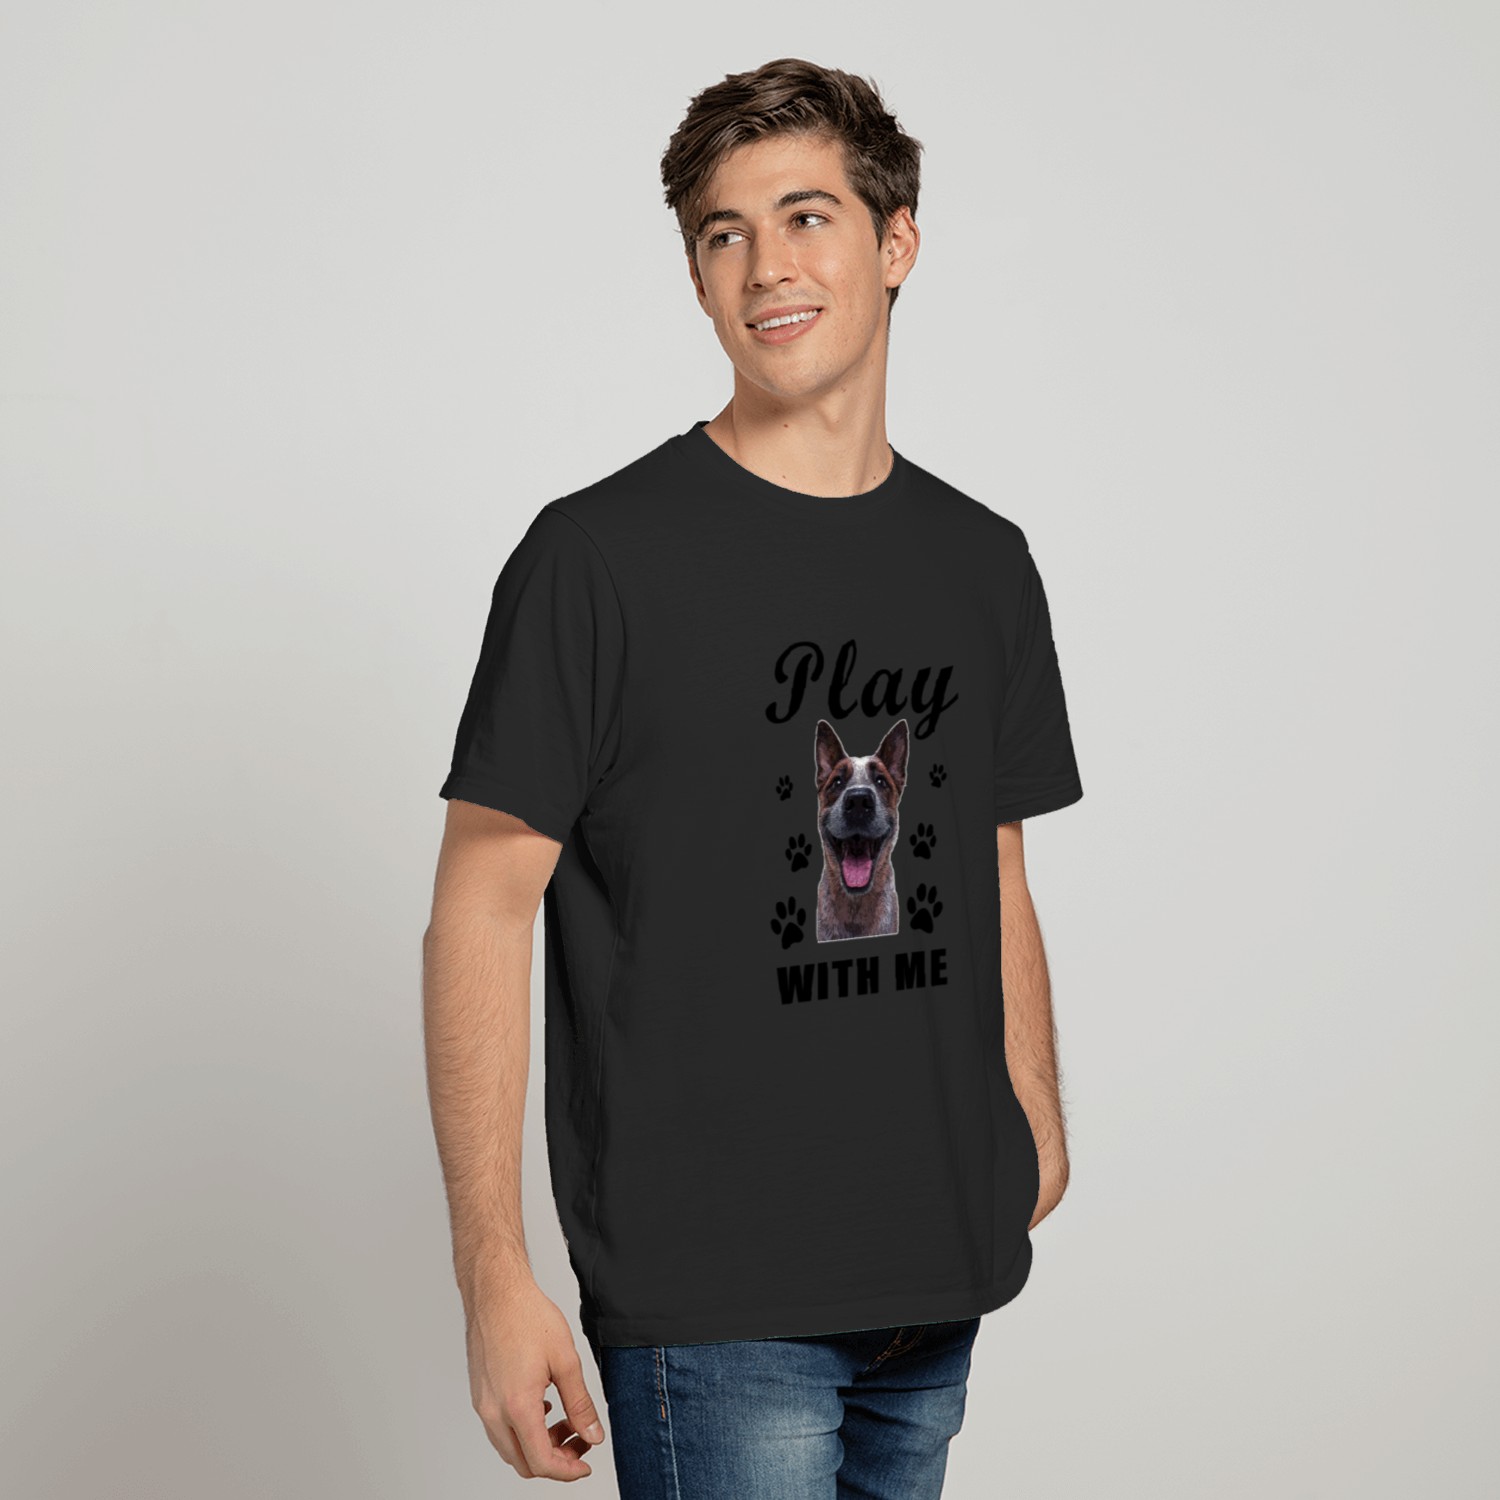 Dog, play with me T-shirt